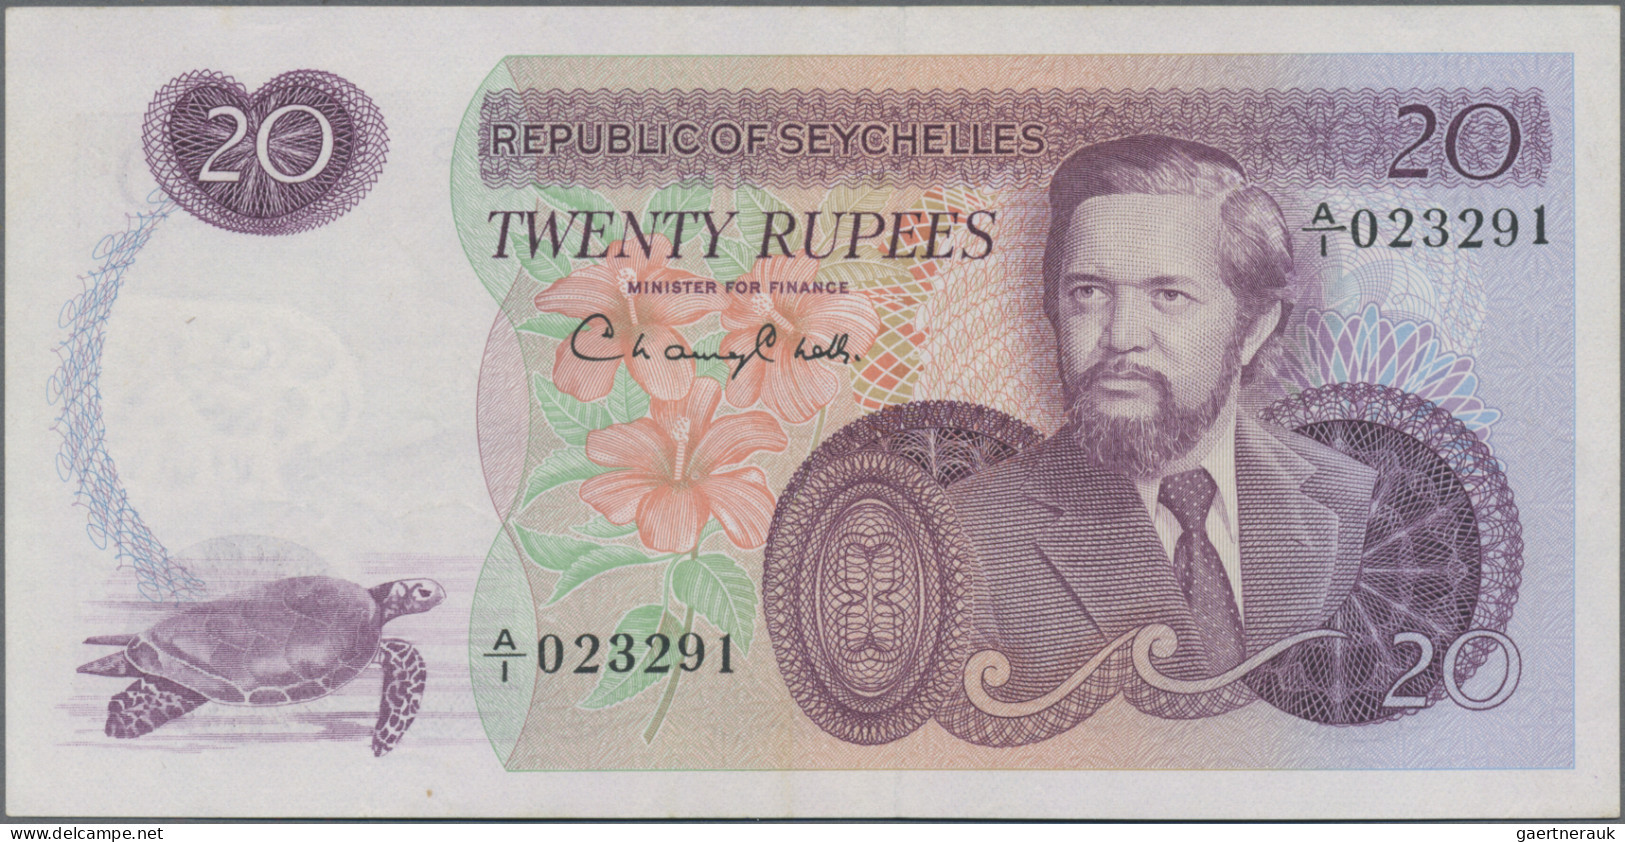 Seychelles: Republic Of Seychelles, Set With 3 Banknotes, Series 1976-77, With 1 - Seychelles